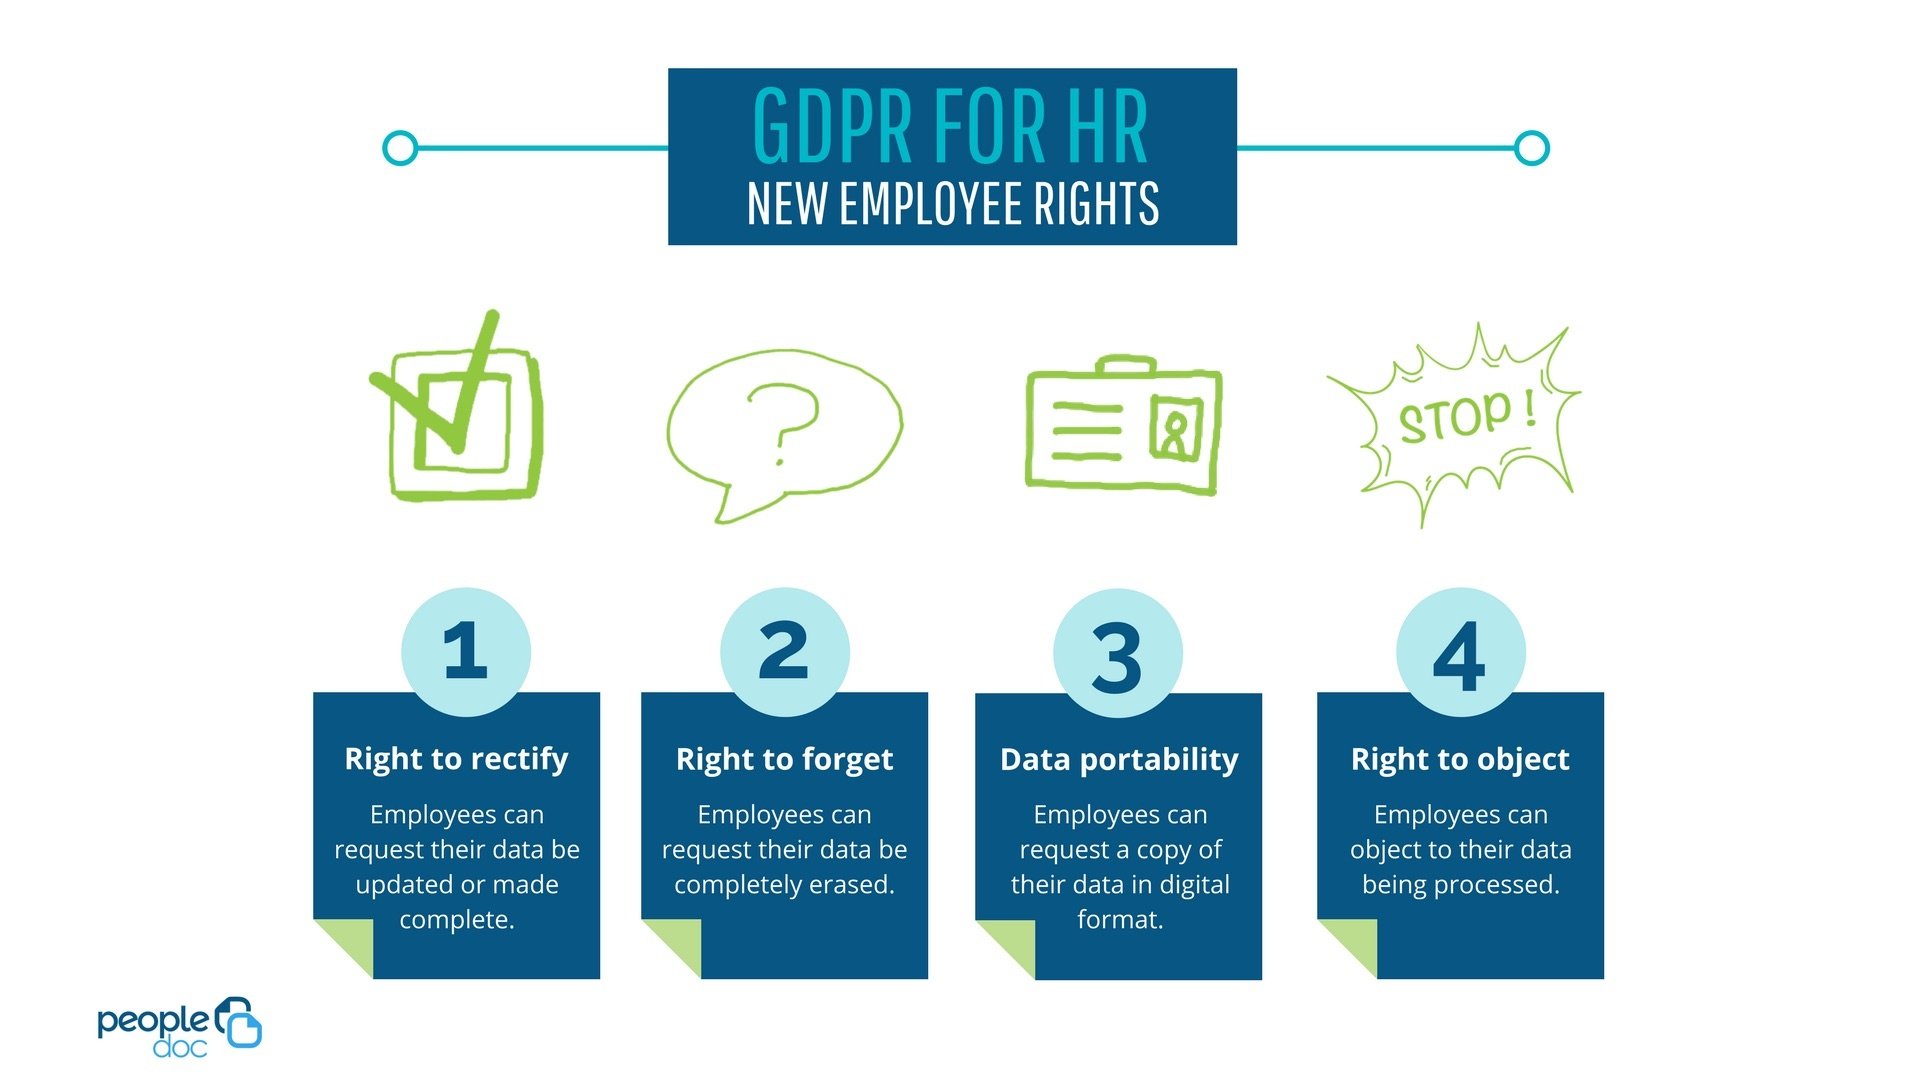 GDPR for HR--The 4 new employee rights: Right to rectify, right to forget, data portability, and right to object.